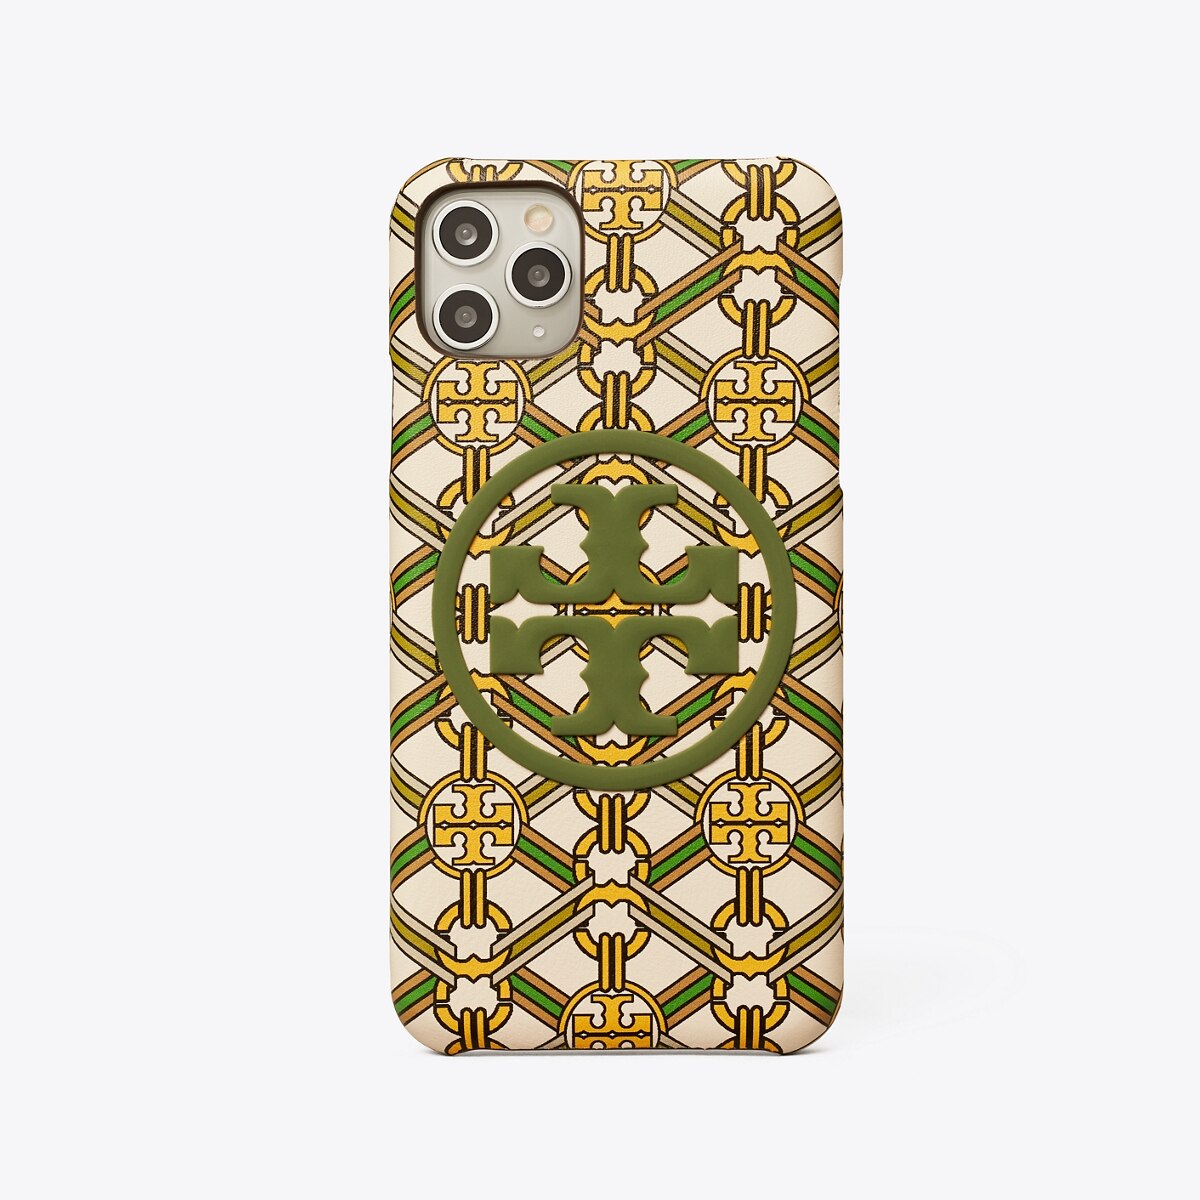 Perry Bombé Printed Phone Case for iPhone 11 Pro Max: Women's 